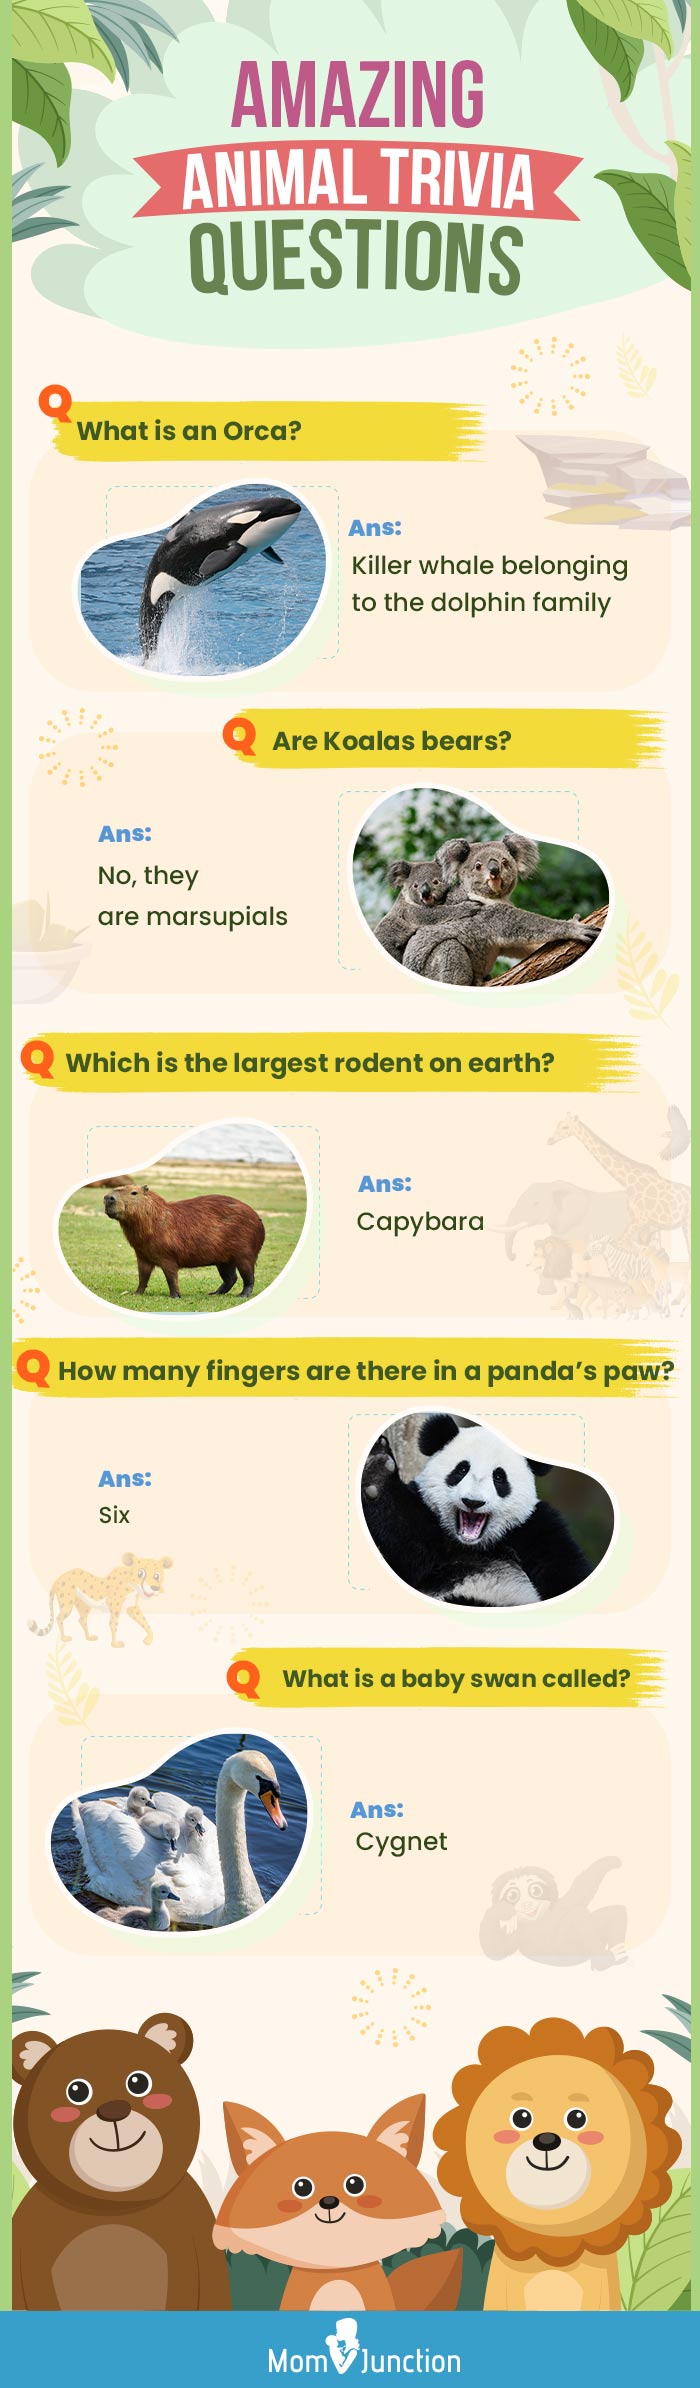 animals trivia questions for kids [infographic]